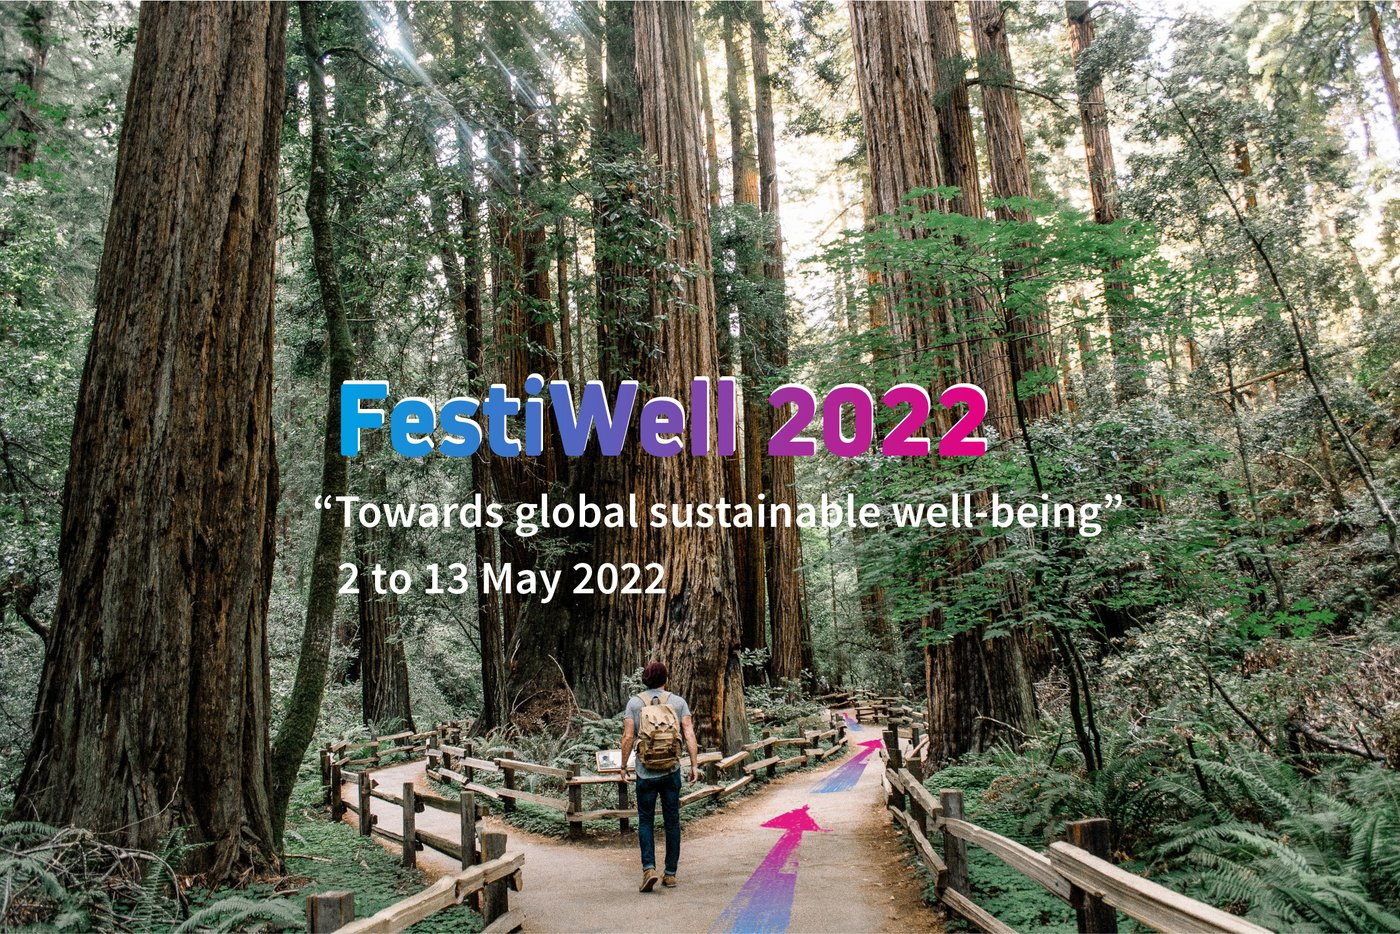 FestiWell 2022: 2 to 13 May 2022